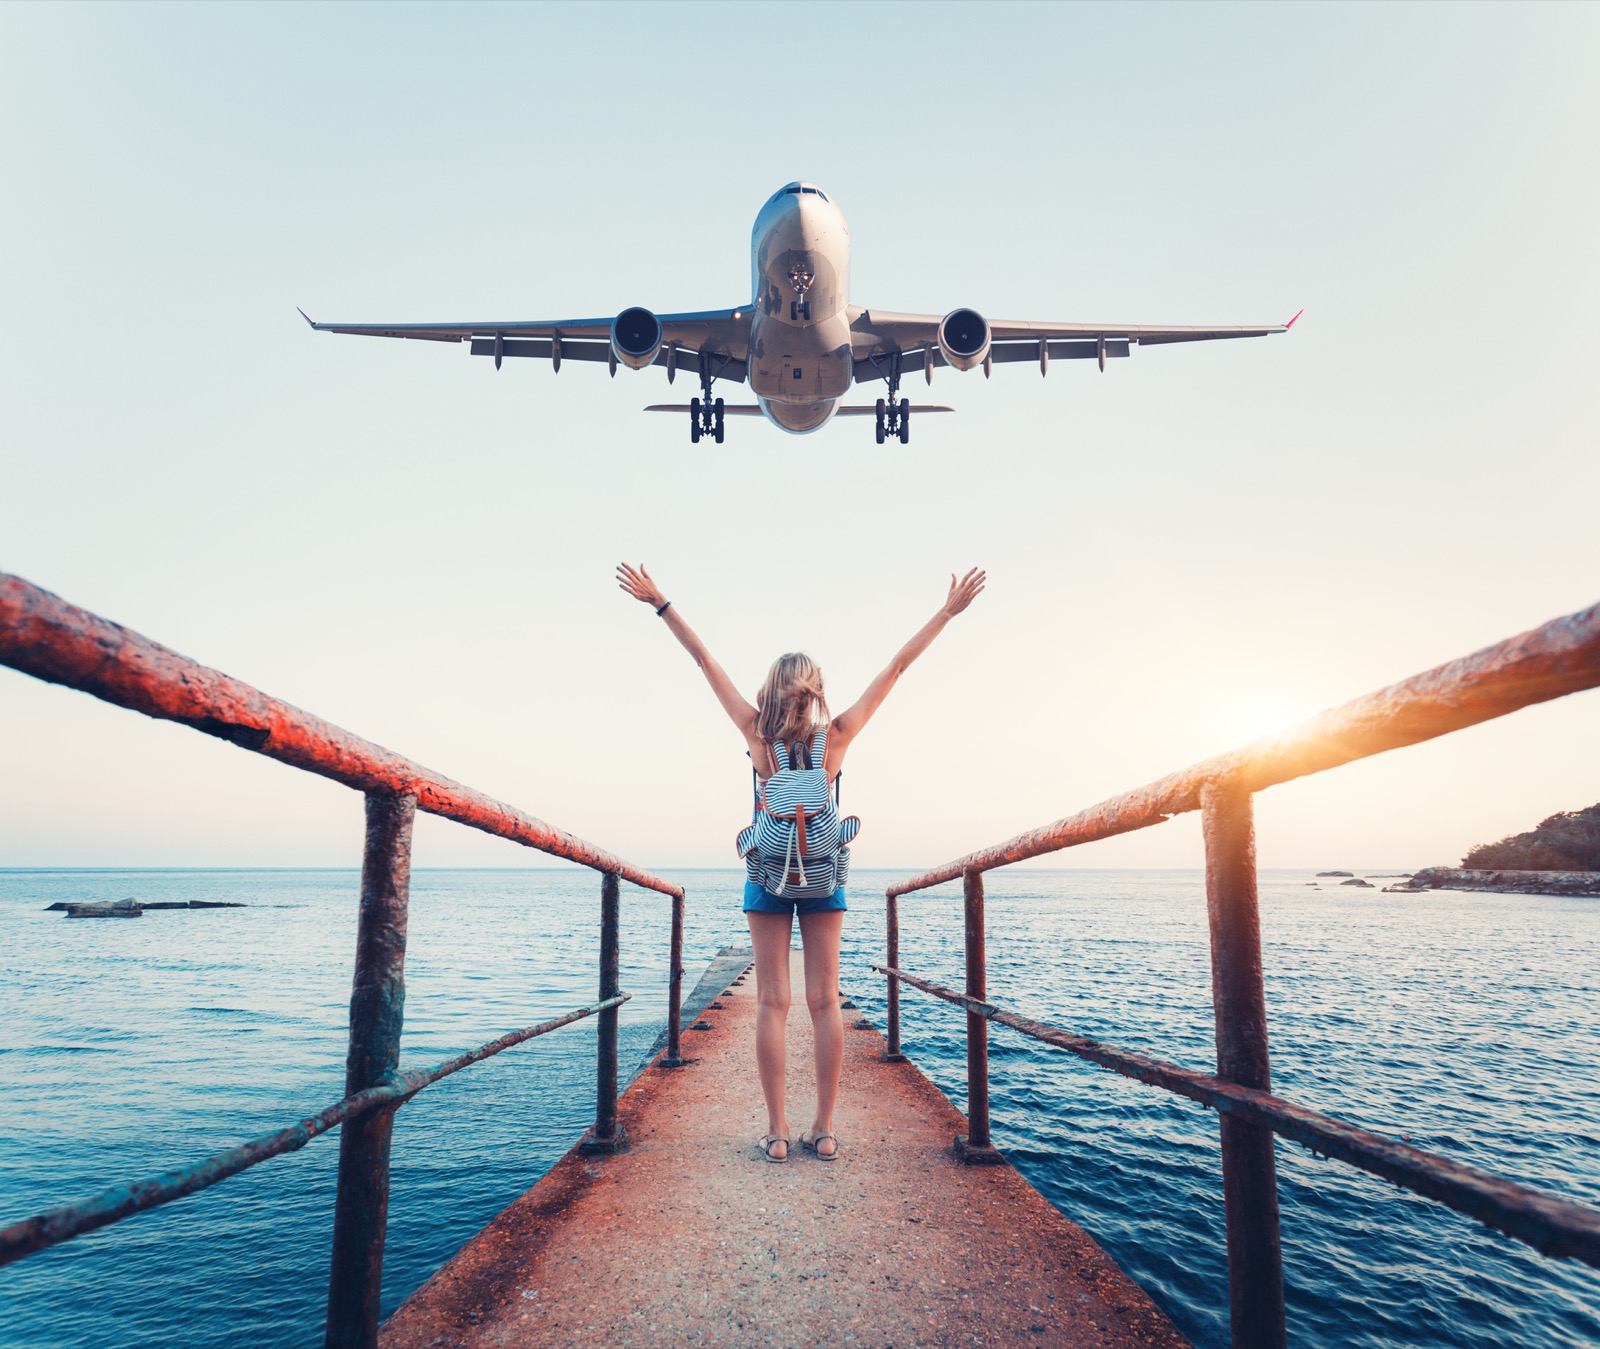 If You Can Score 16/22 on This General Knowledge Quiz, I’ll Be Gobsmacked Airplane And Woman At Sunset. Summer Landscape With Girl Standing On The Sea Pier With Raised Up Arms And Flying Passenger Airplane. Woman And Landing Commercial Plane In The Evening. Lifestyle